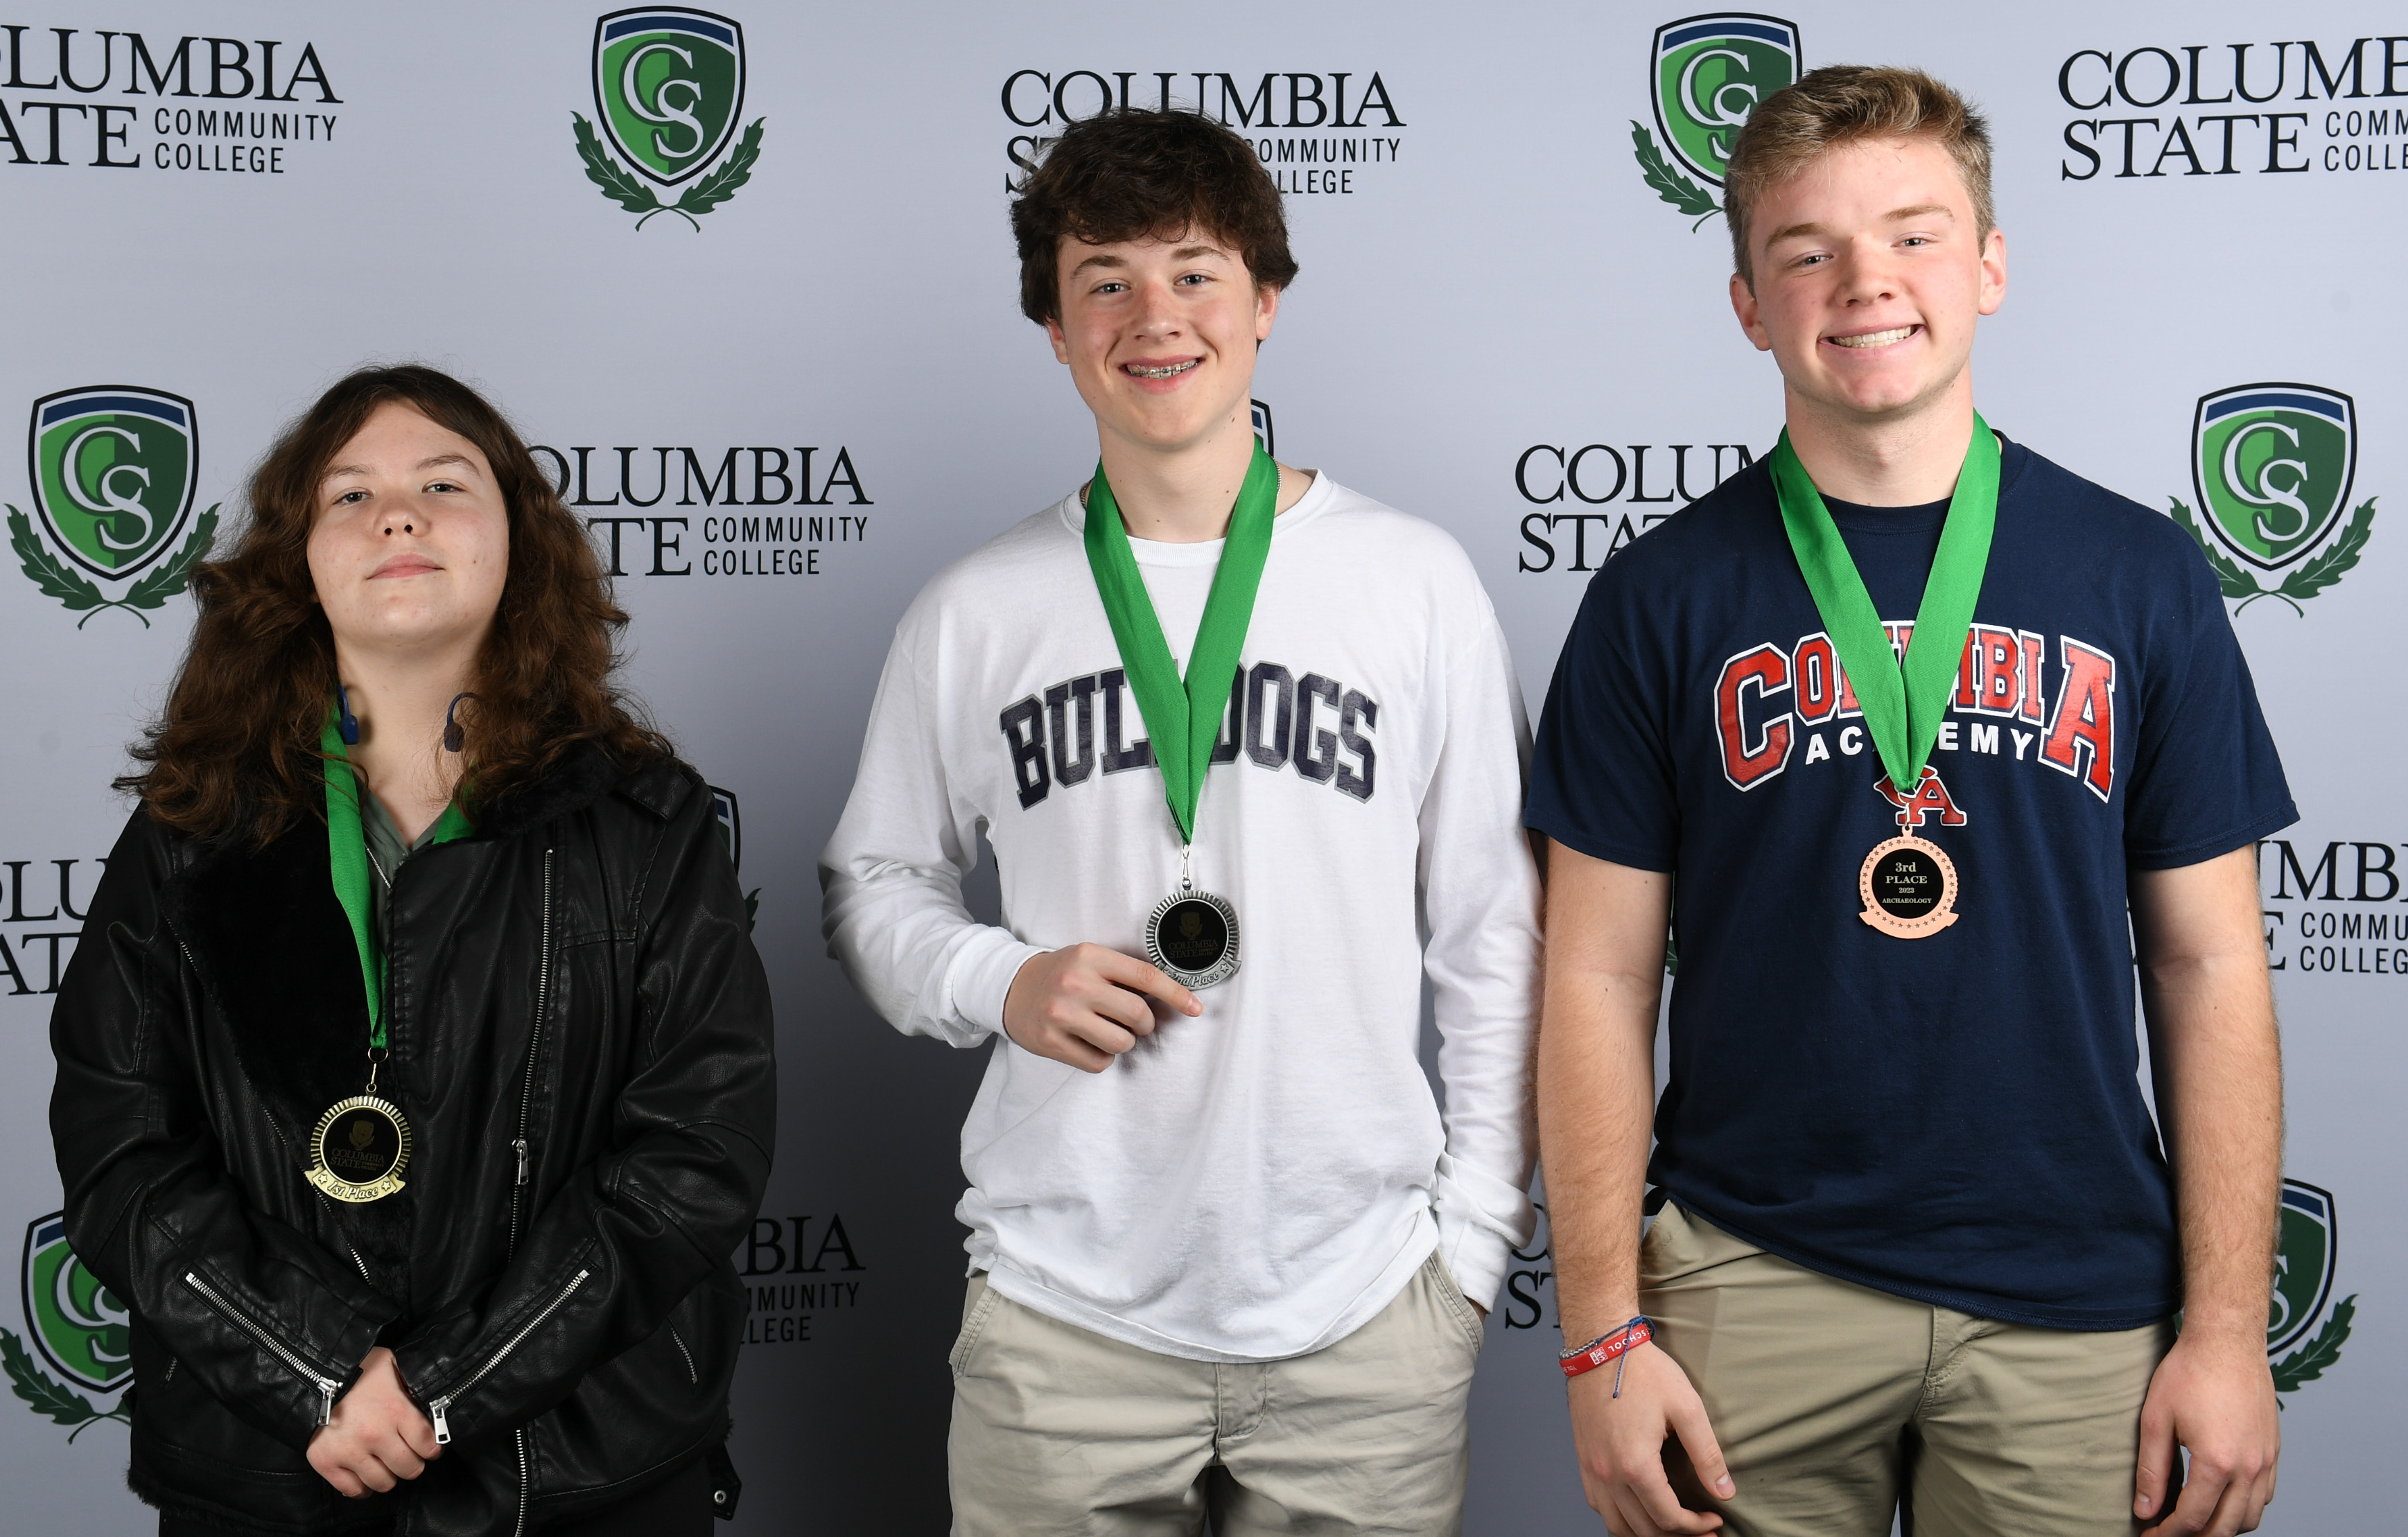 Archaeology Winners (left to right): First place winner, Shelby Clark of East Hickman High School; second place winner, Isaac Smith of Columbia Academy; and third place winner, Rhett Dupree of Columbia Academy.